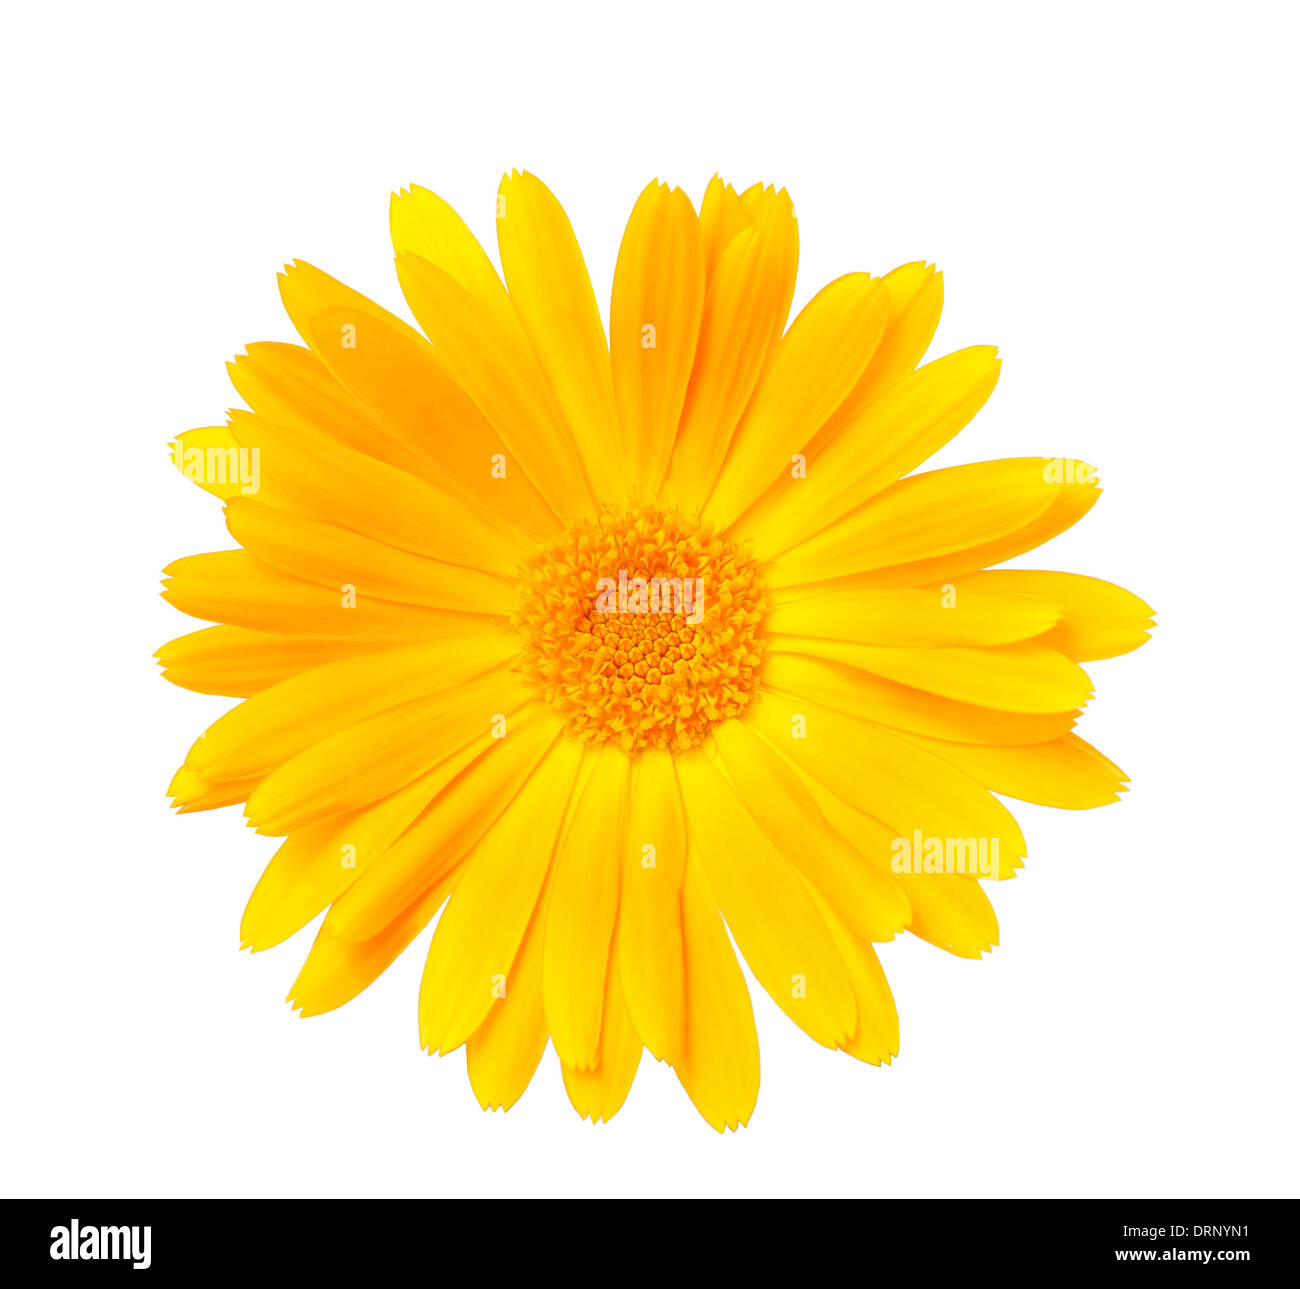 Calendula. Marigold flowers isolated on white Banque D'Images